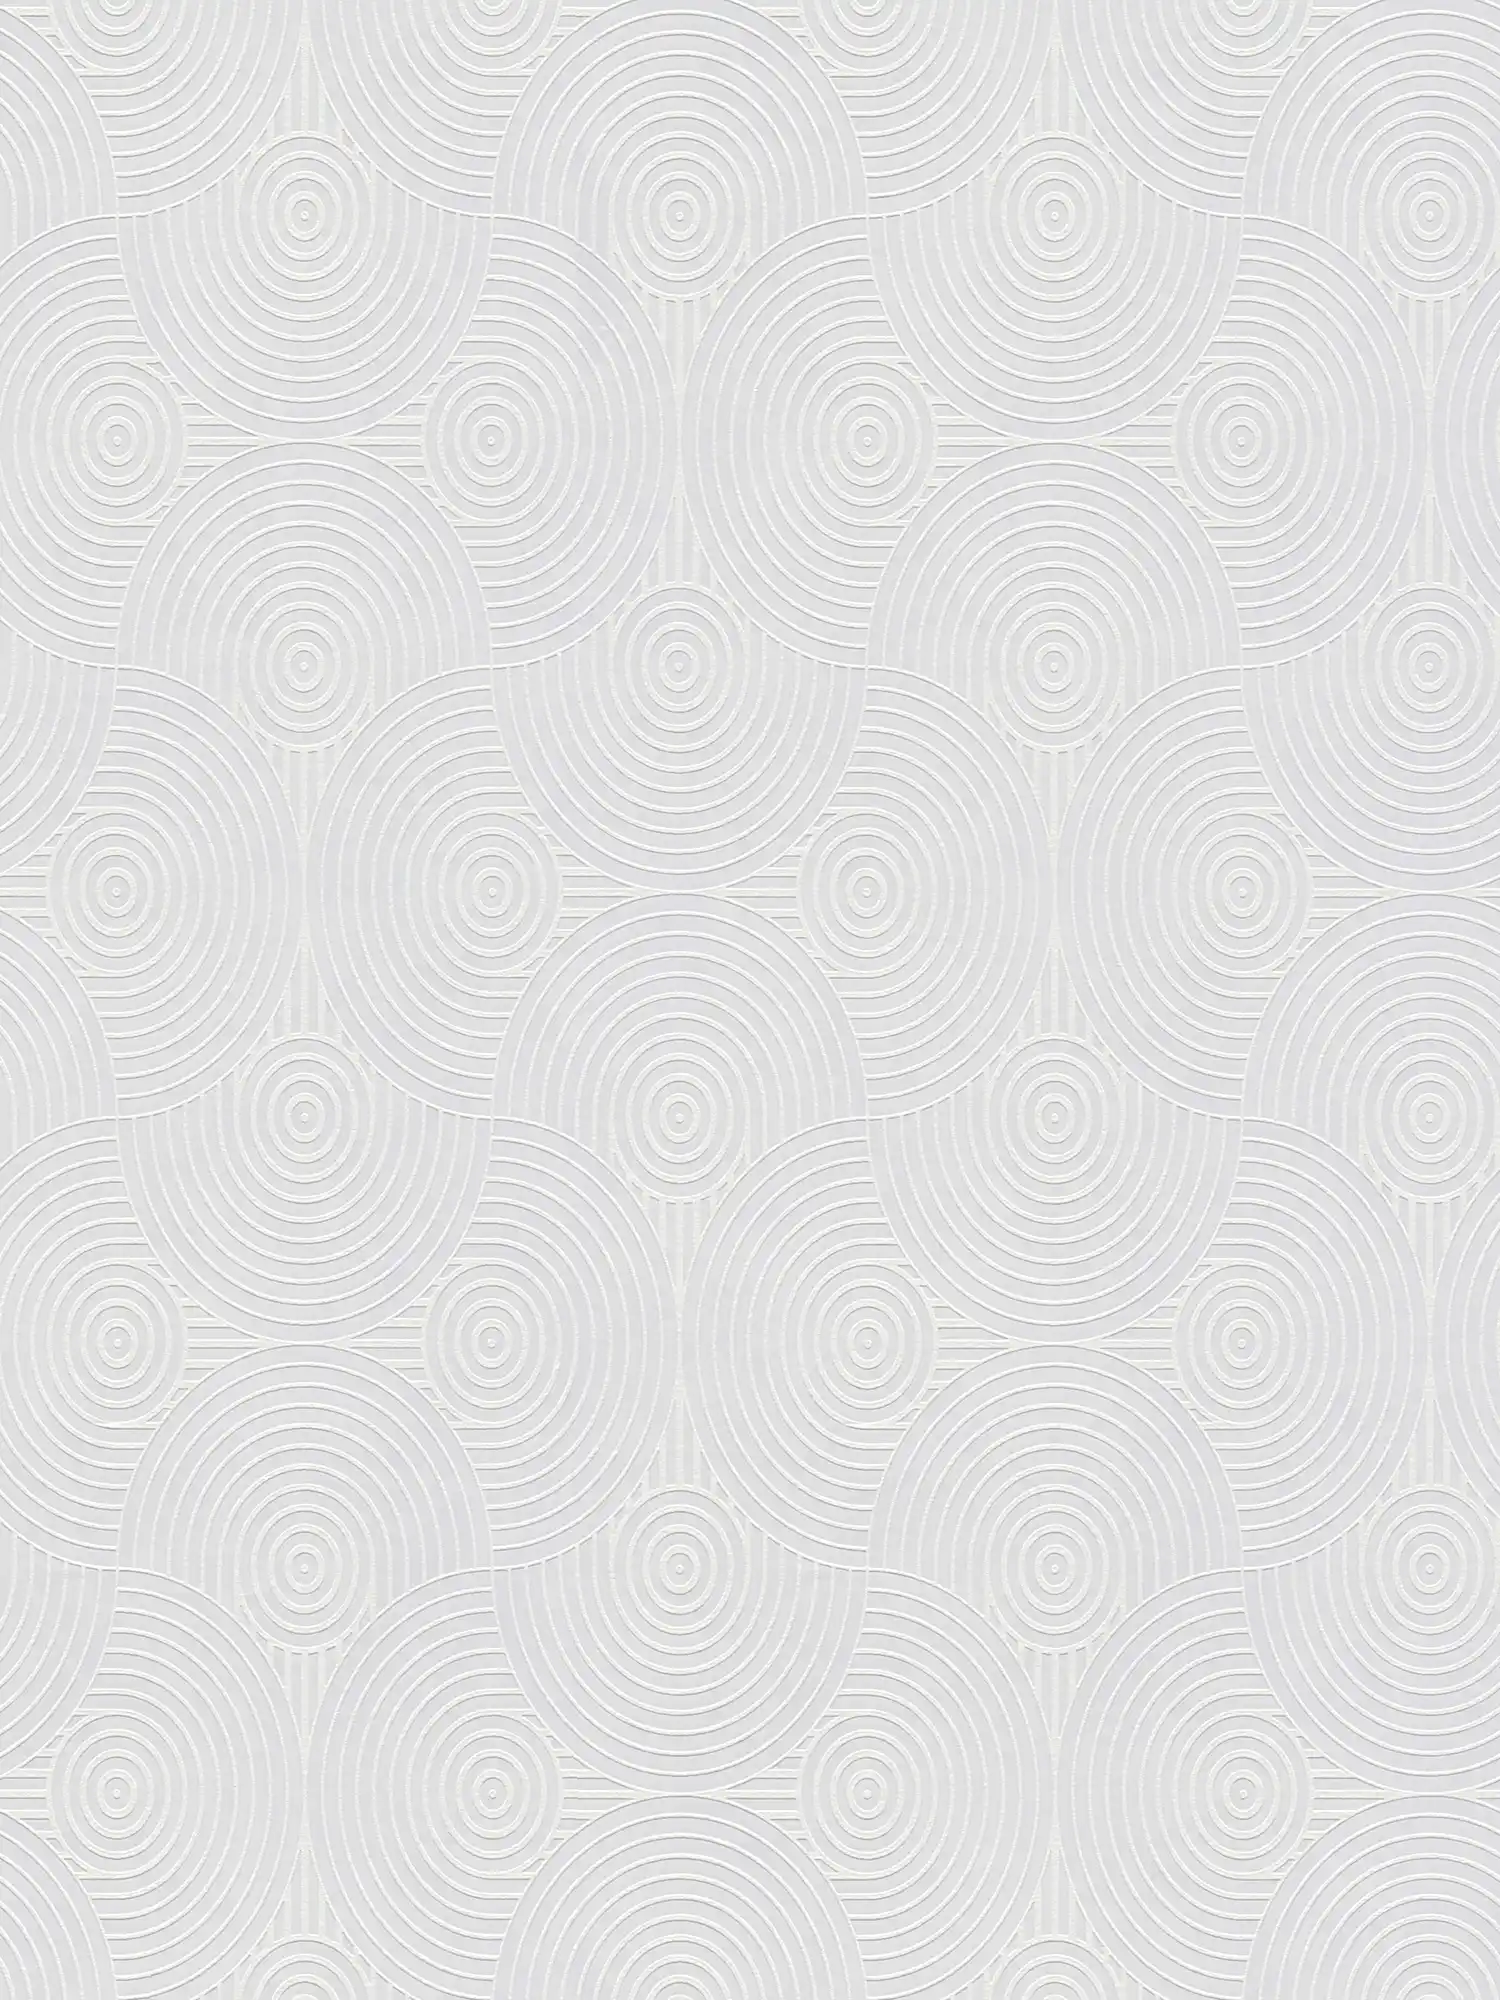 Paintable wallpaper with semi-circle pattern of lines - Paintable
